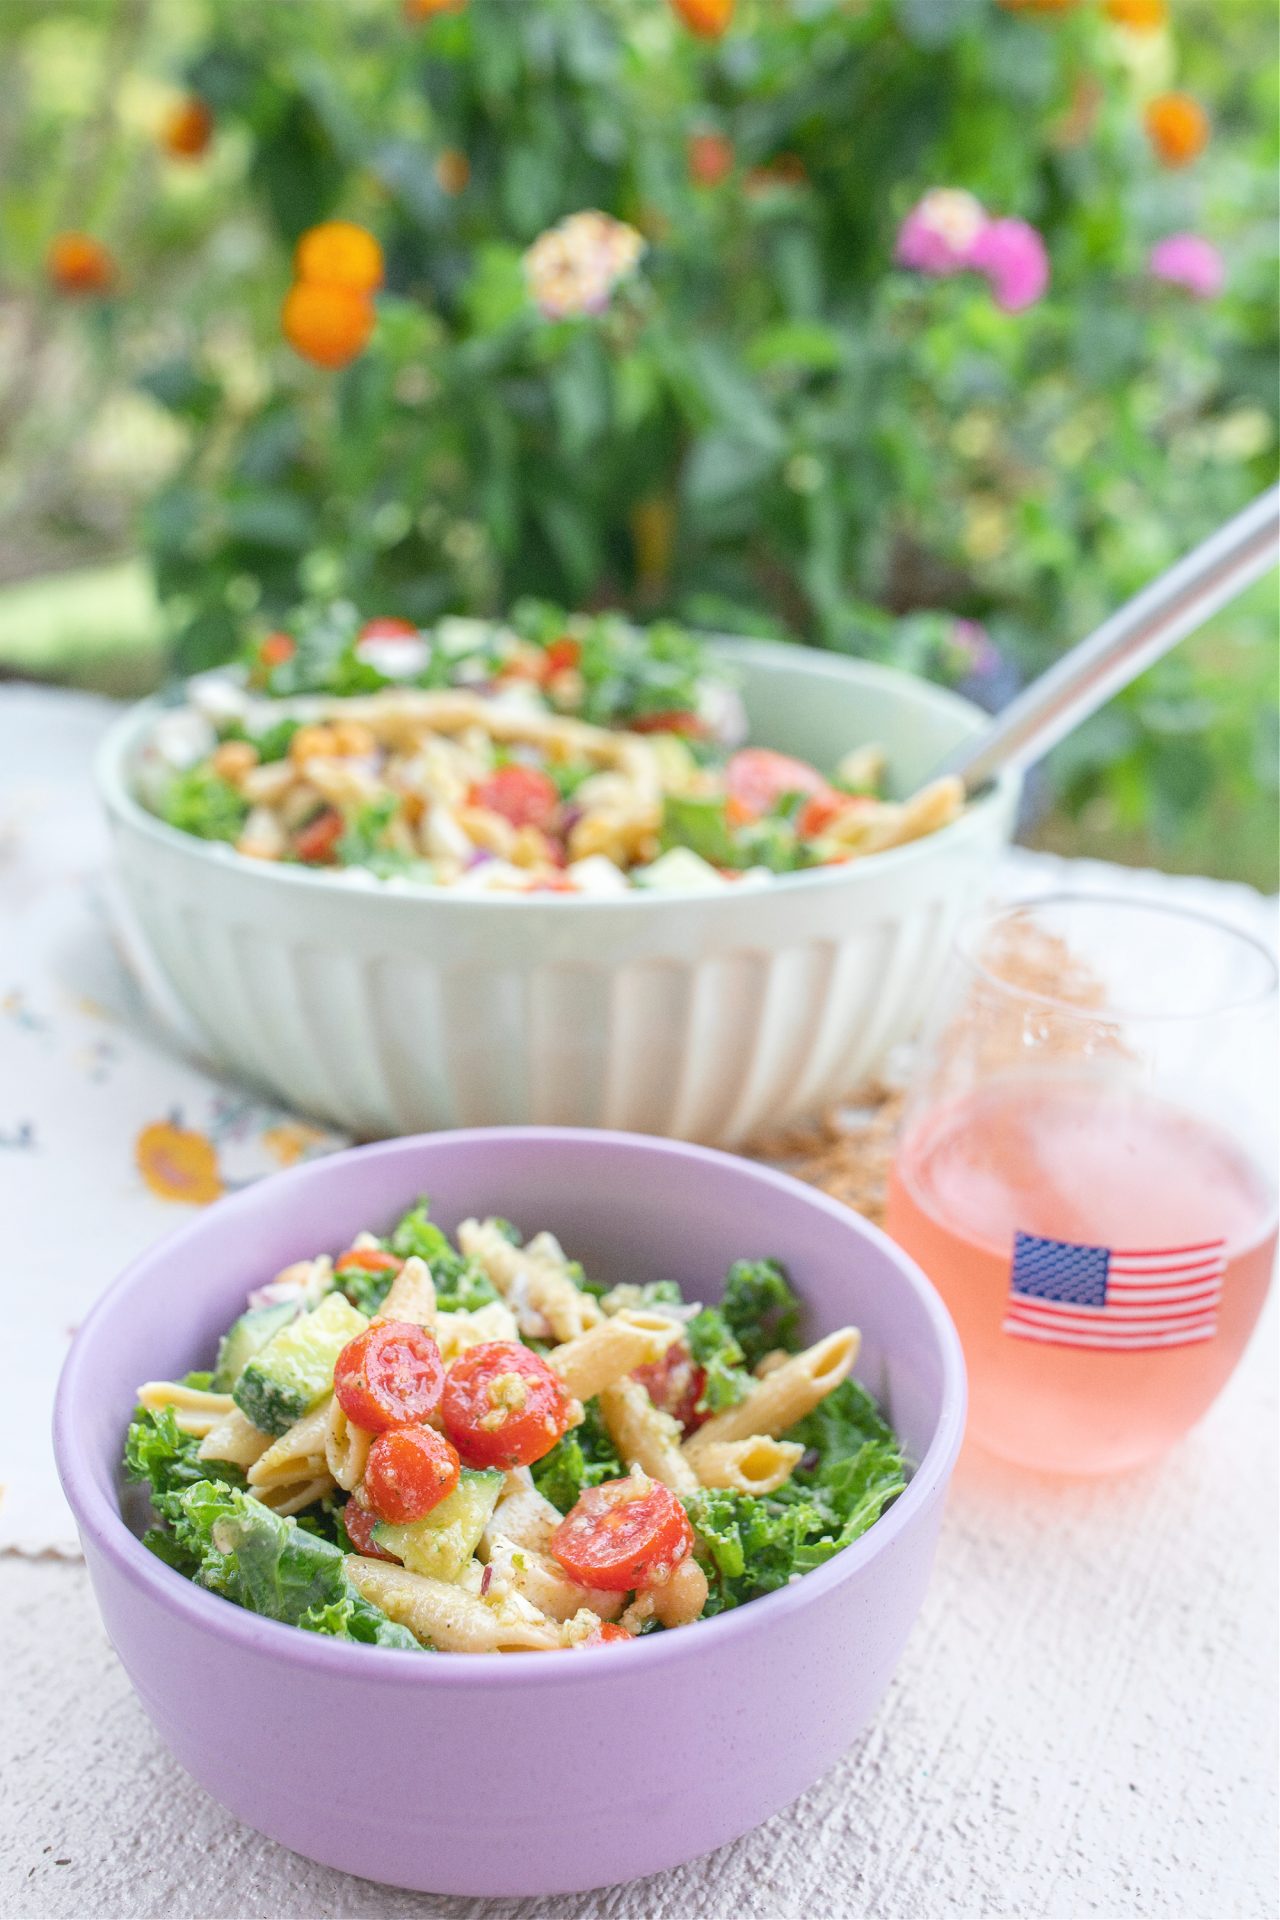 pesto pasta salad, chickpea, lunch, meal prep, gluten-free, kale salad, healthy eating, party foods, delicious colorful meals, lunch, dinner, side salad, pasta salad, pesto, basil, mozzarella, no bake